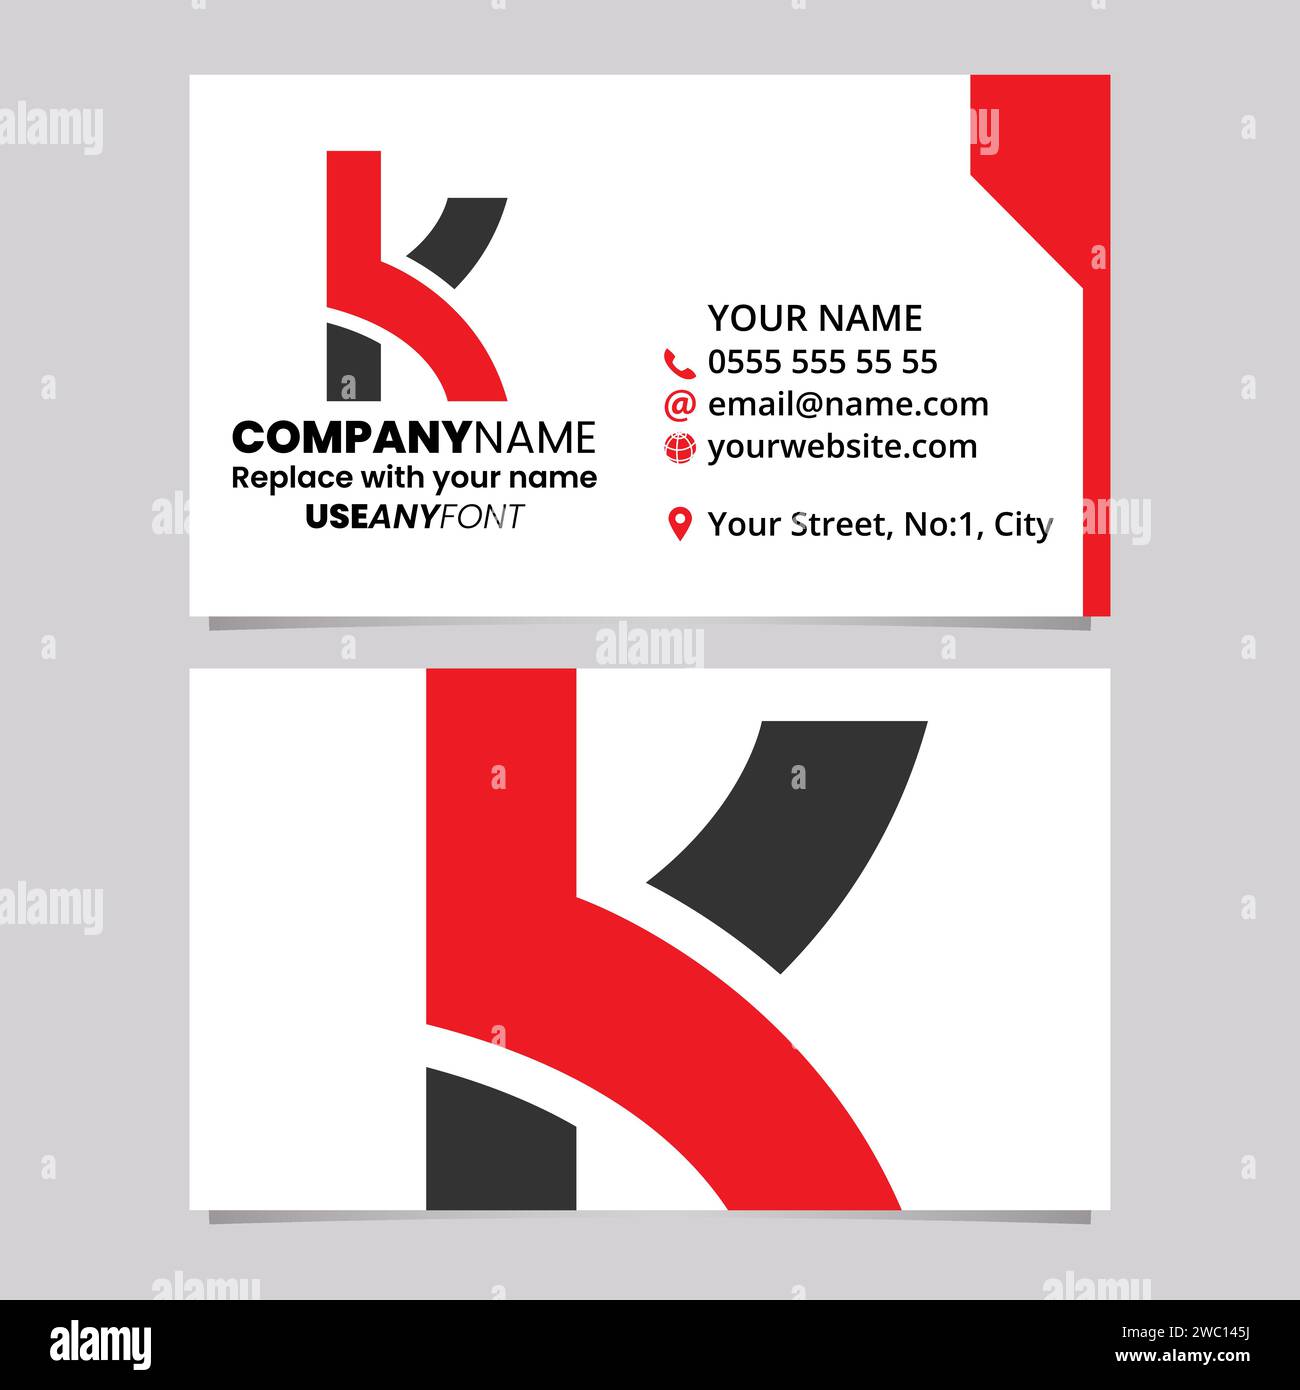 Red and Black Business Card Template with Overlapping Shaped Letter K Logo Icon Over a Light Grey Background Stock Vector